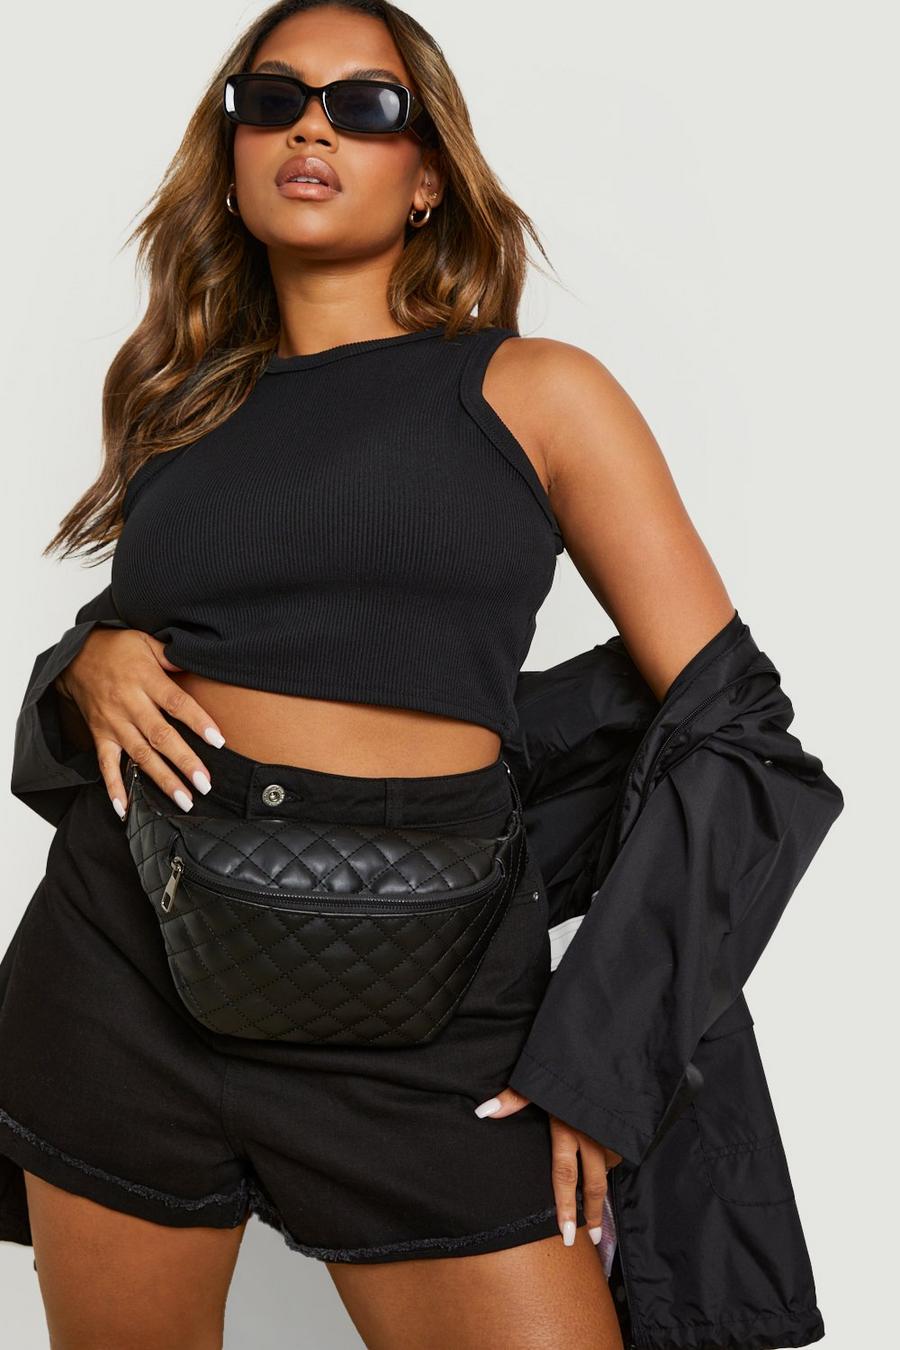 Plus Quilted Fanny Pack